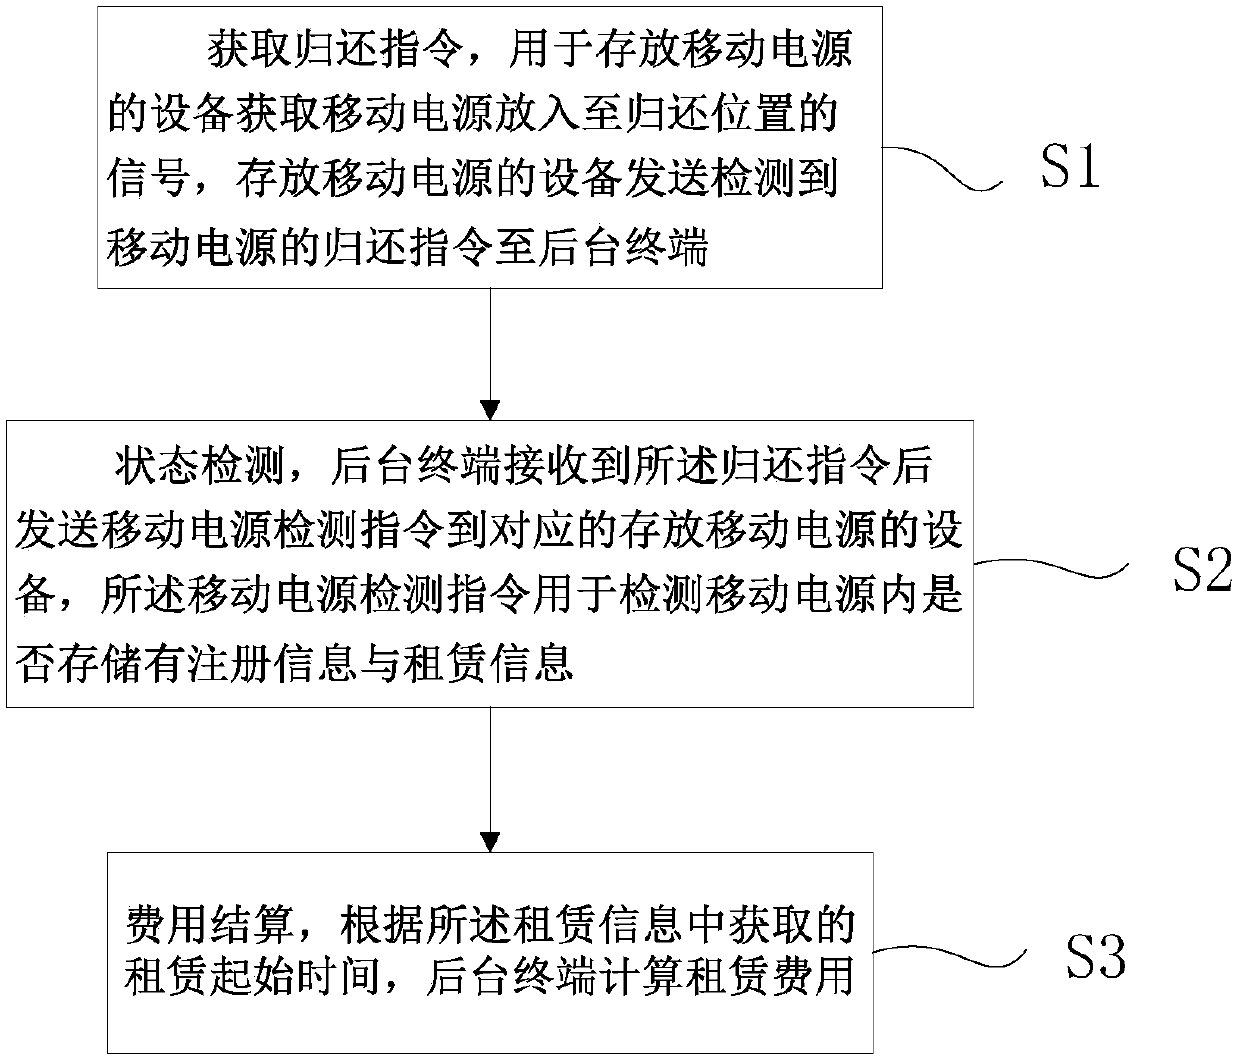 Portable power source rental and return management method, storage medium and electronic equipment